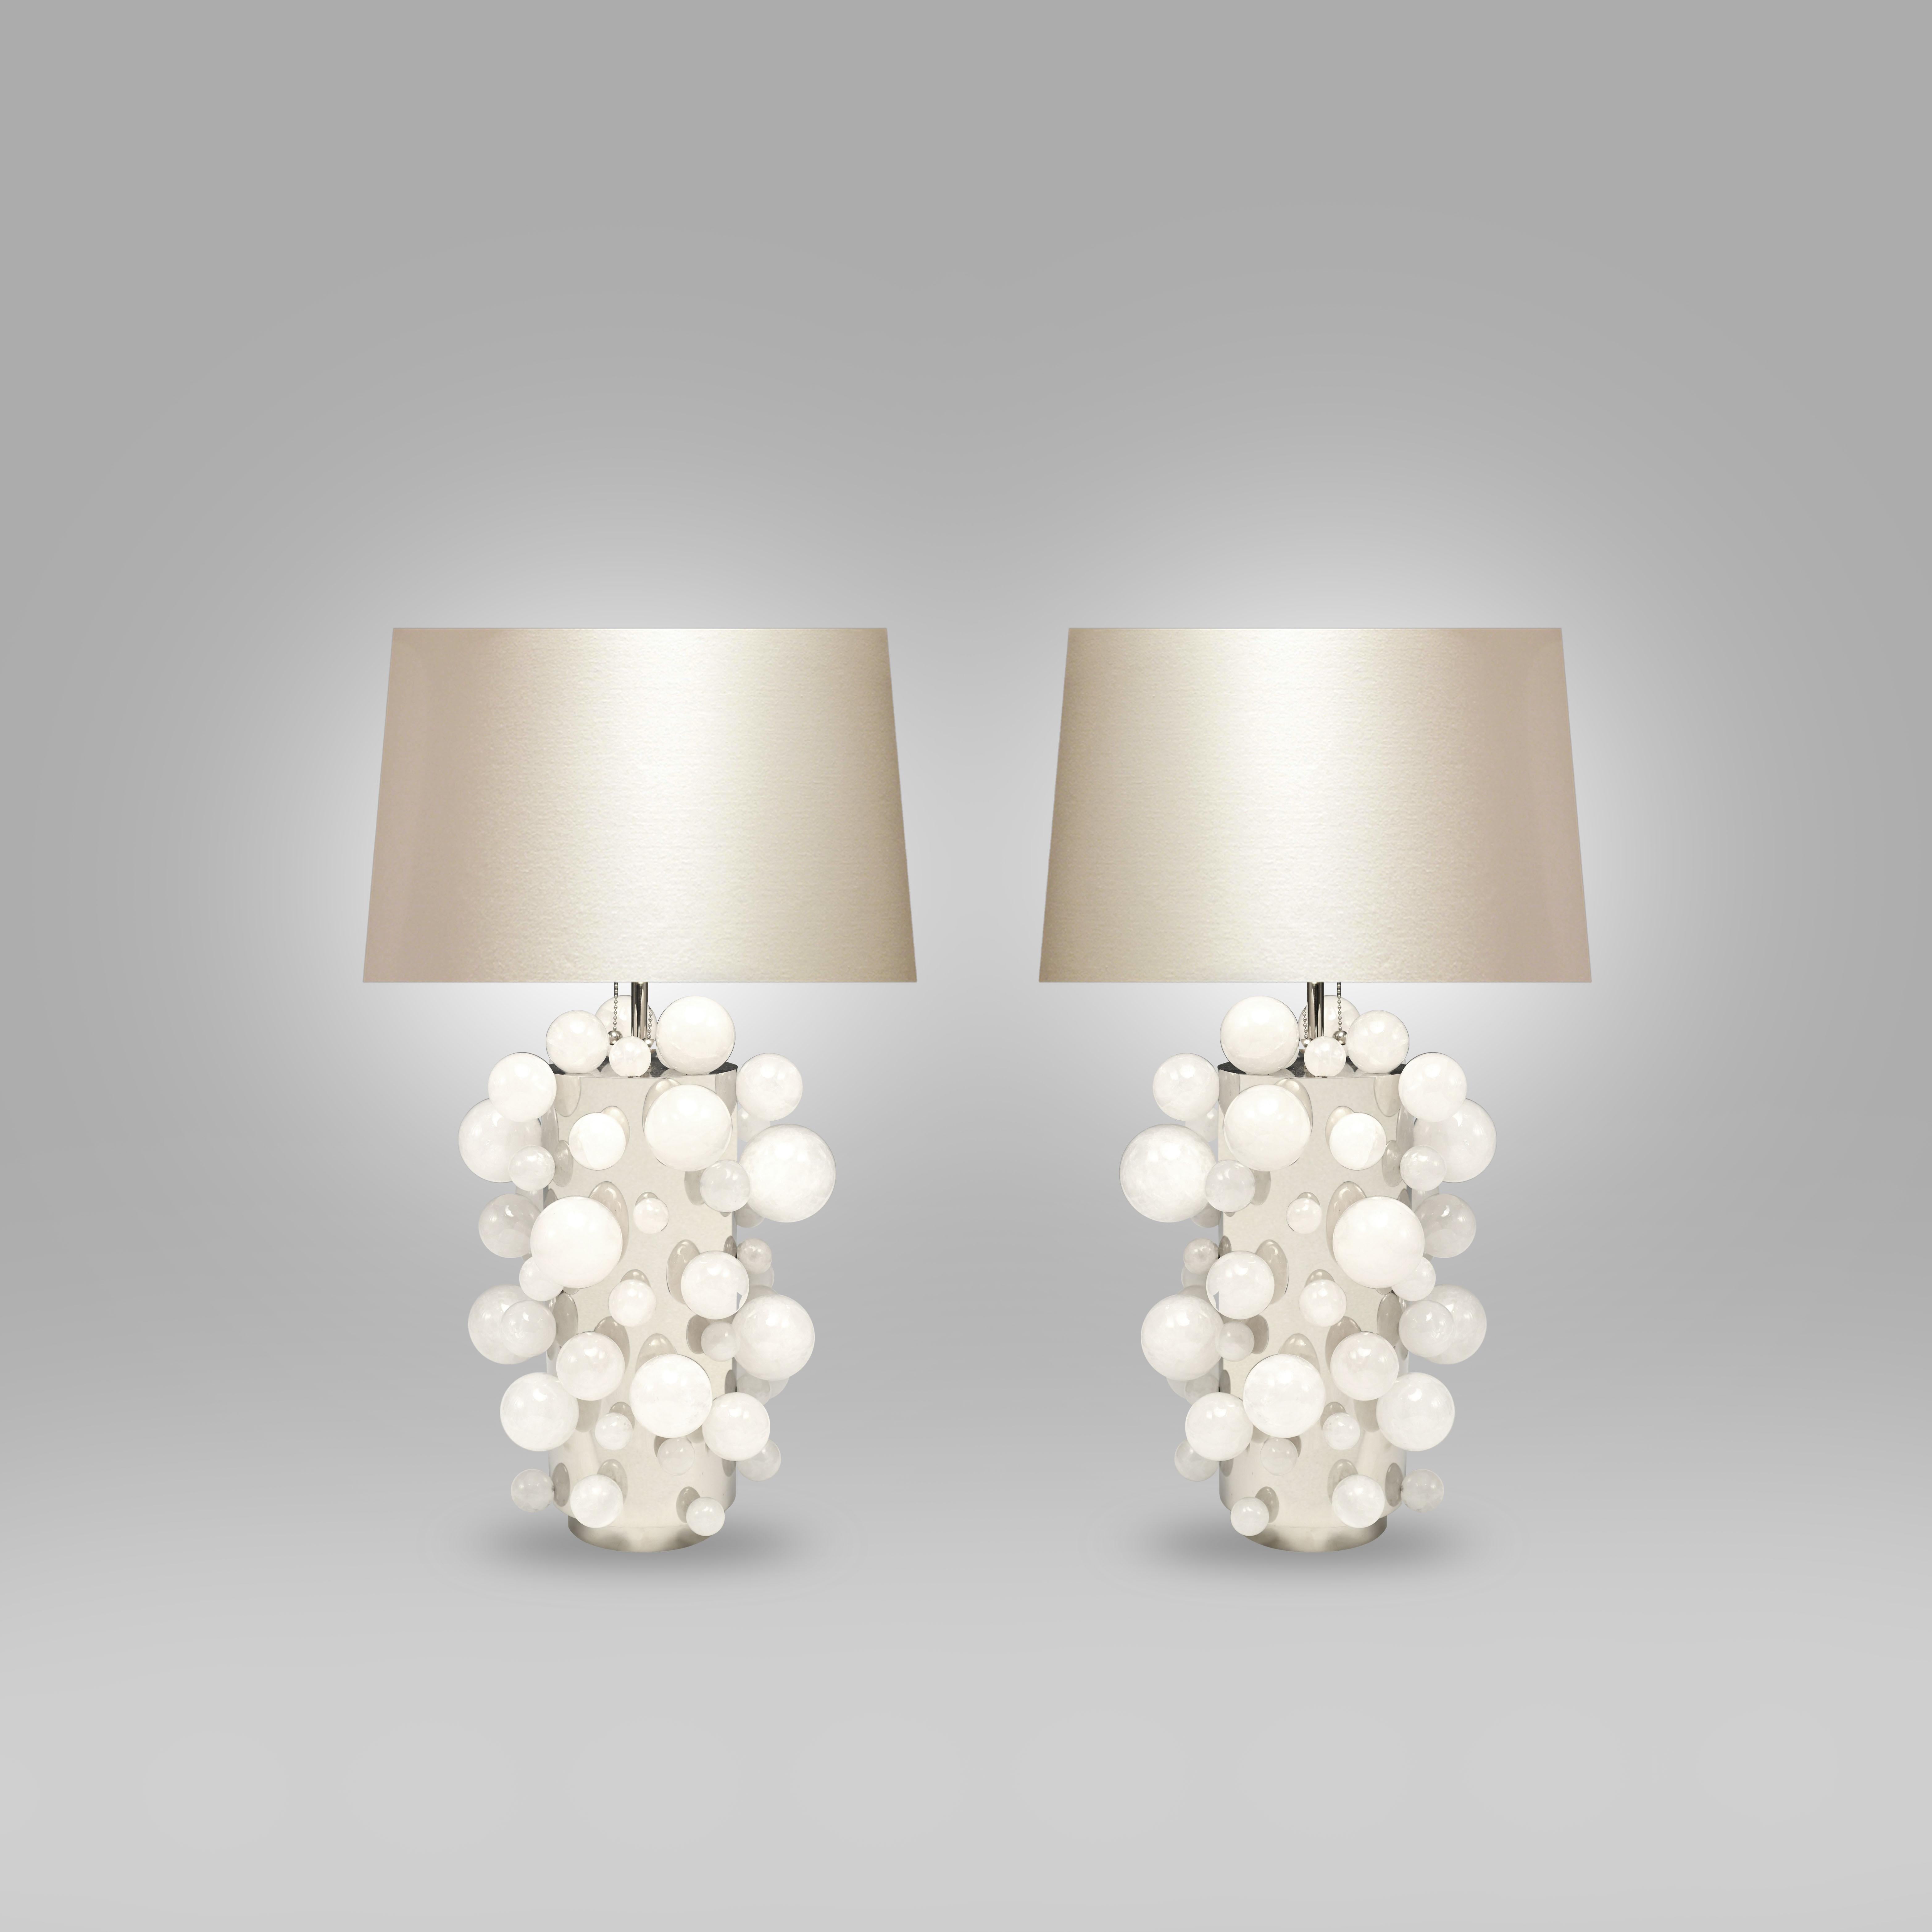 A pair of luxury white rock crystal quartz bulb lamps with nickel brass bases, created by Phoenix Gallery, NYC.
To the top of the rock crystal 17inch
Lampshade not included. Custom size available.